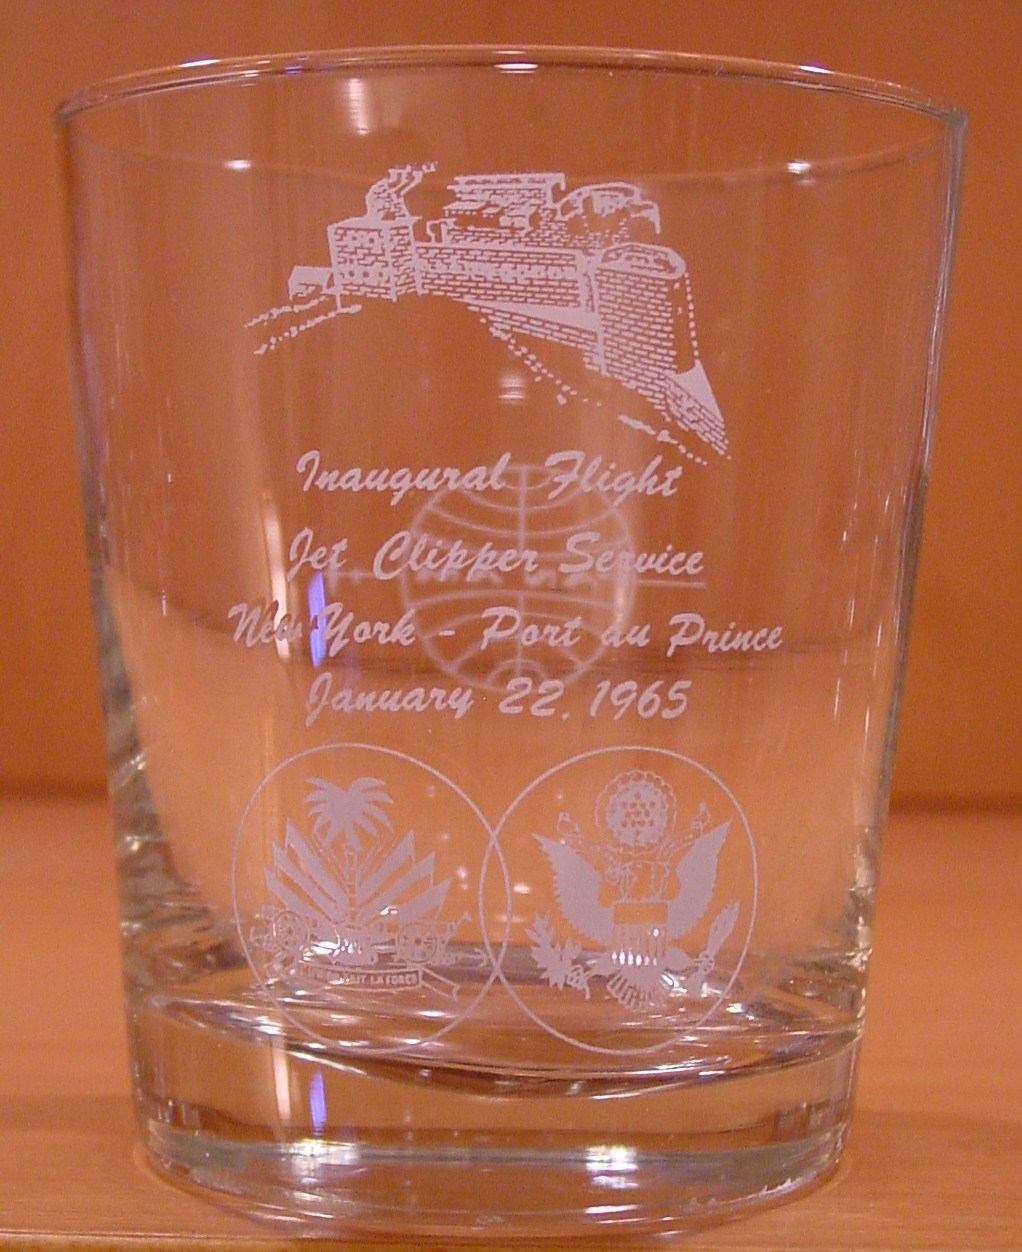 1965 January  22, A glass for the Inaugural jet flight from New York City to Port au Prince, Haiti.